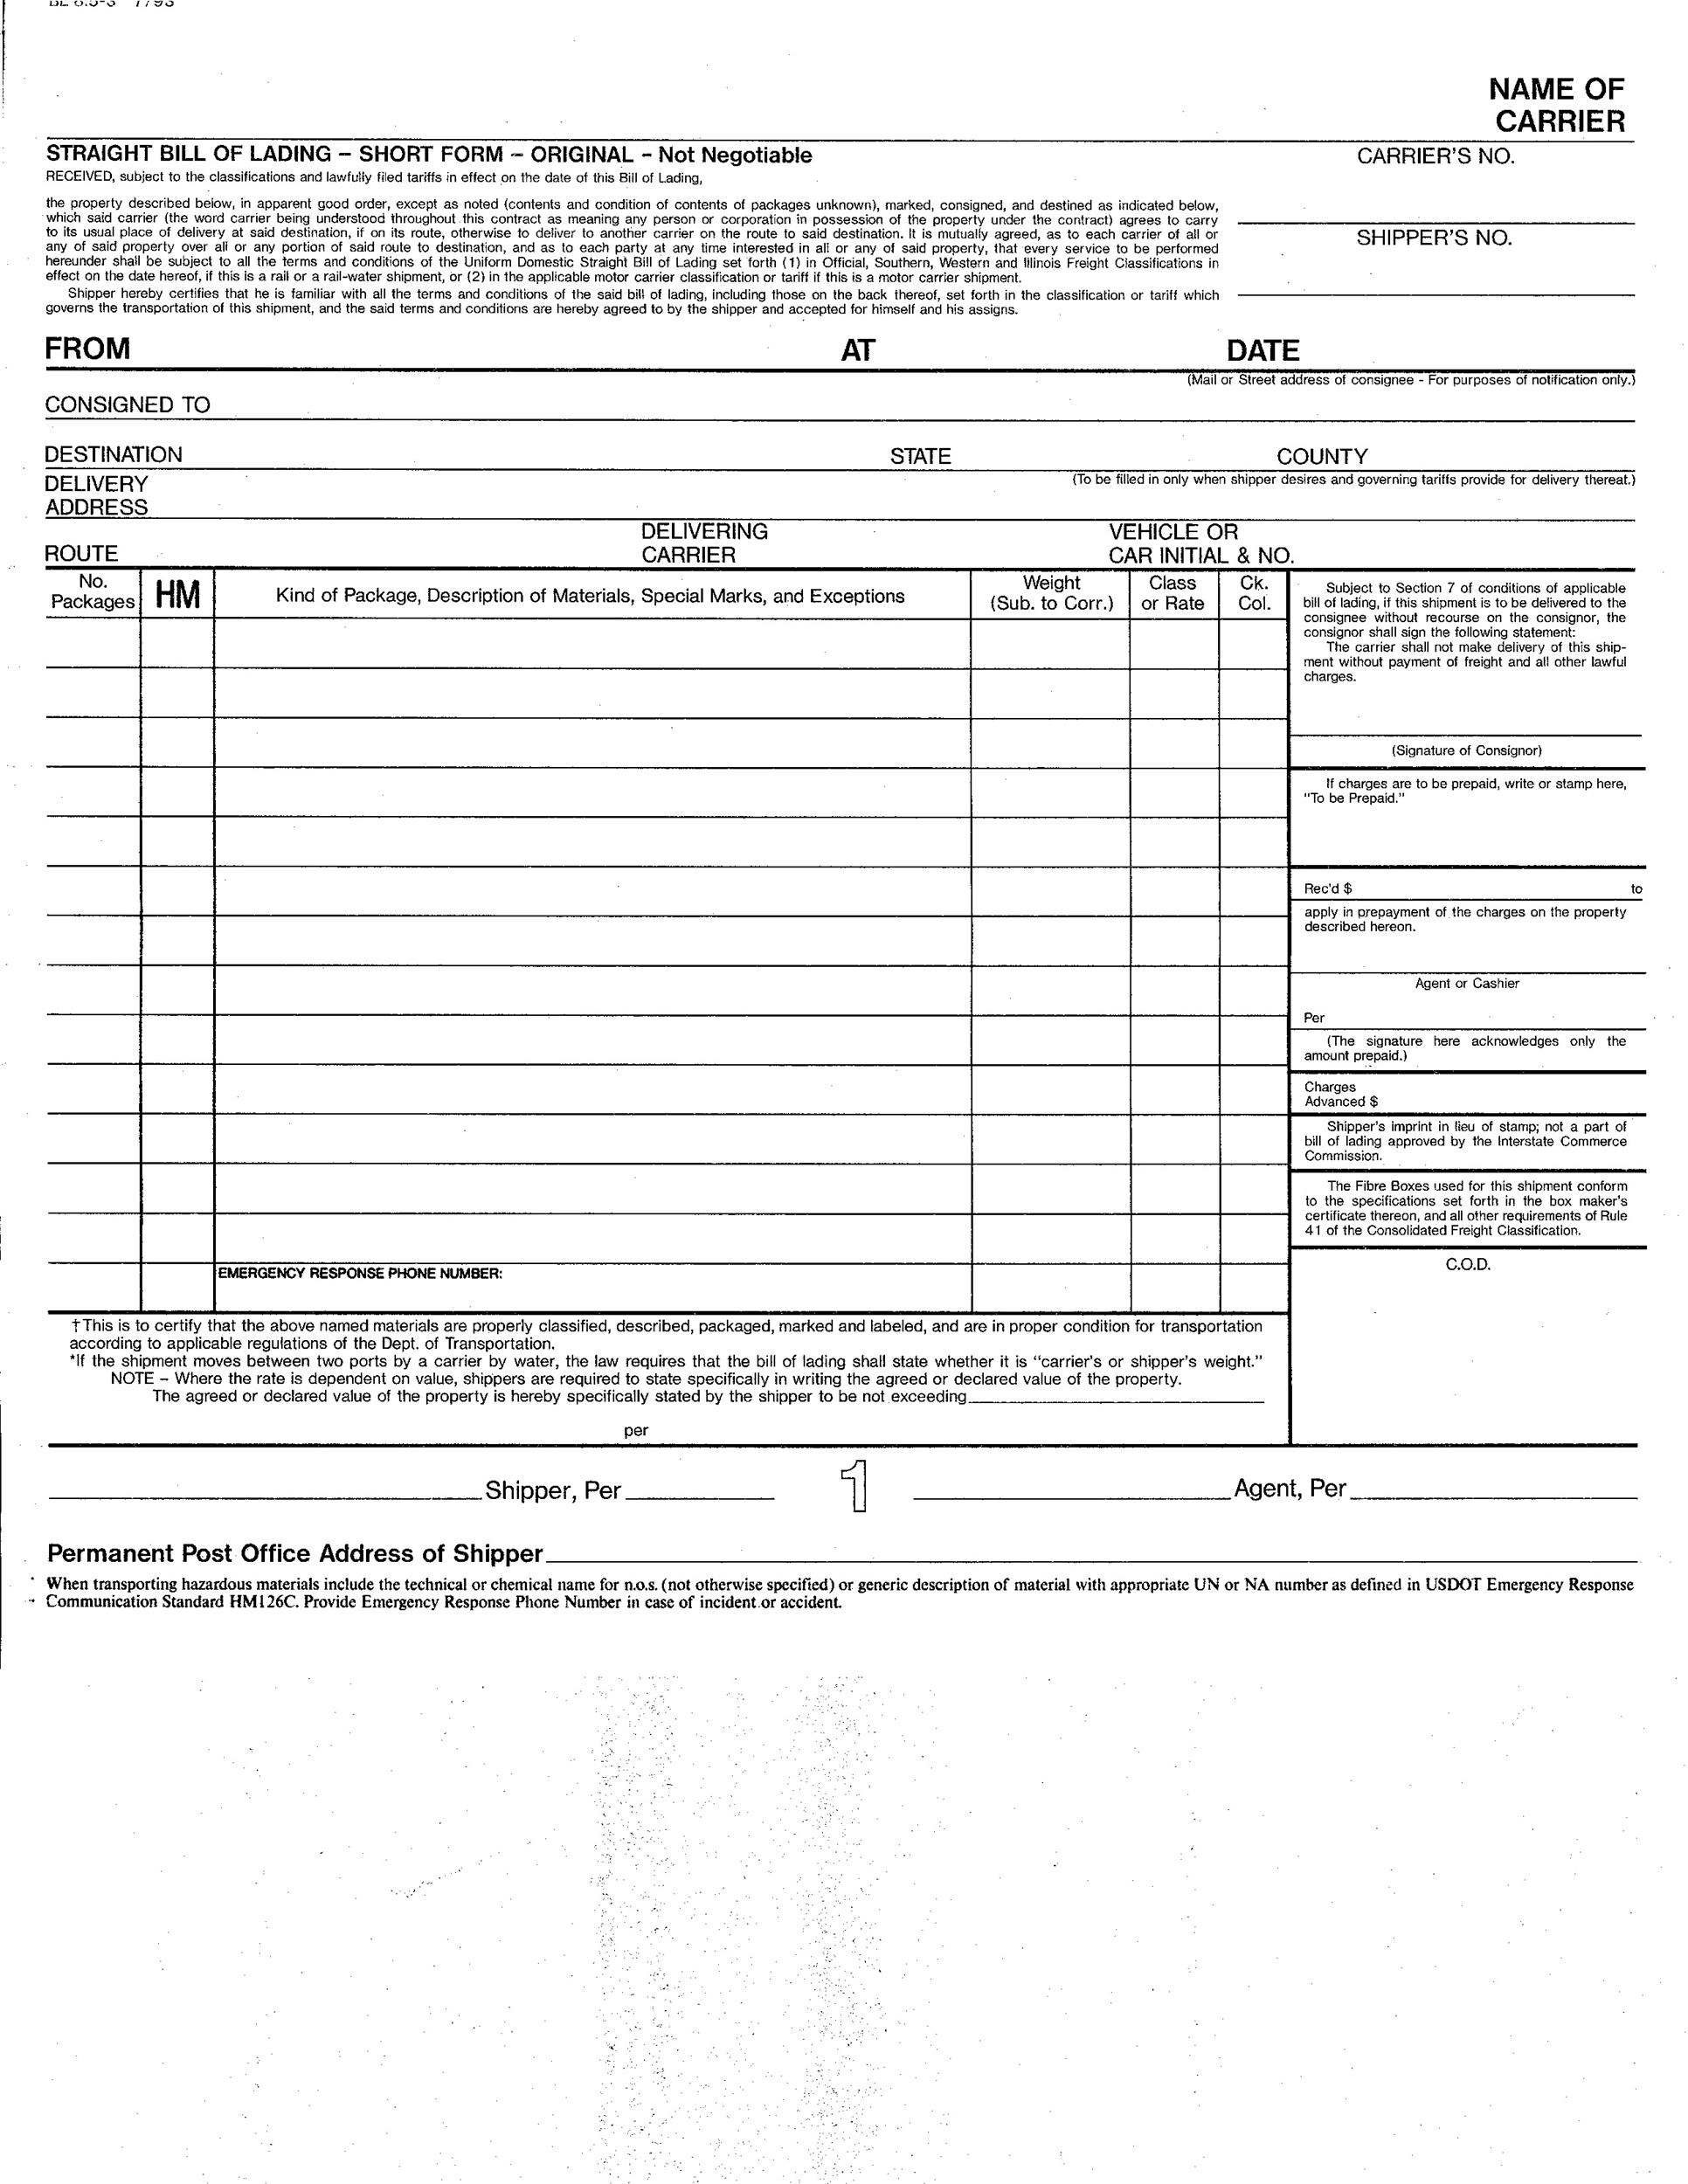 40 Free Bill Of Lading Forms Templates ᐅ Templatelab